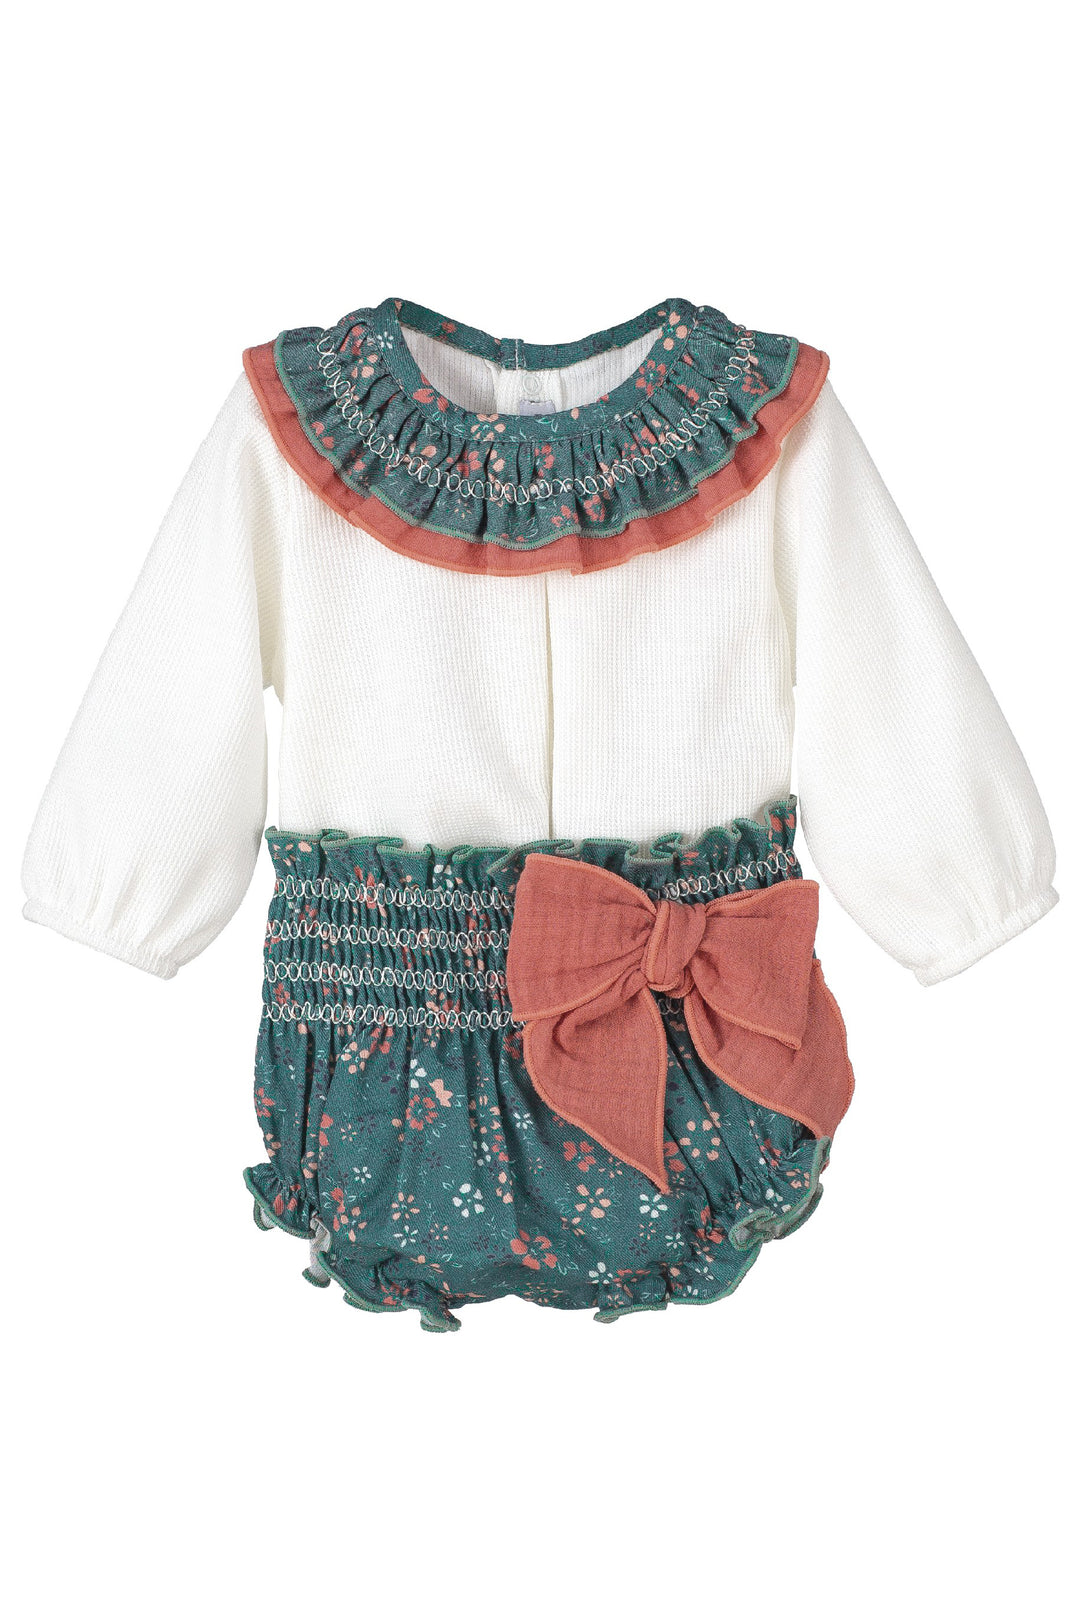 Calamaro "Maia" Teal Floral Blouse & Bloomers | Millie and John